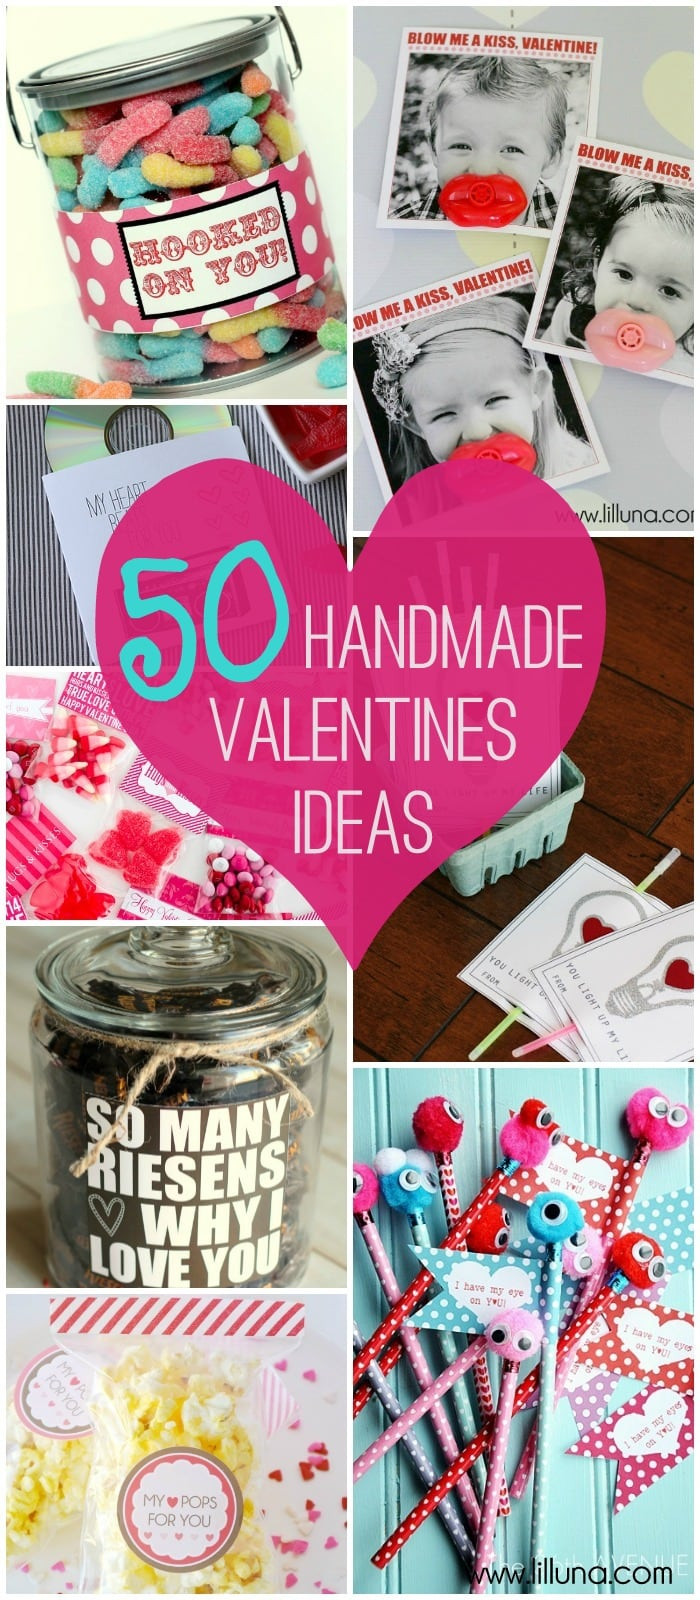 Gift Ideas For Valentines
 14 Gifts of Valentines with Free Printables plus MORE